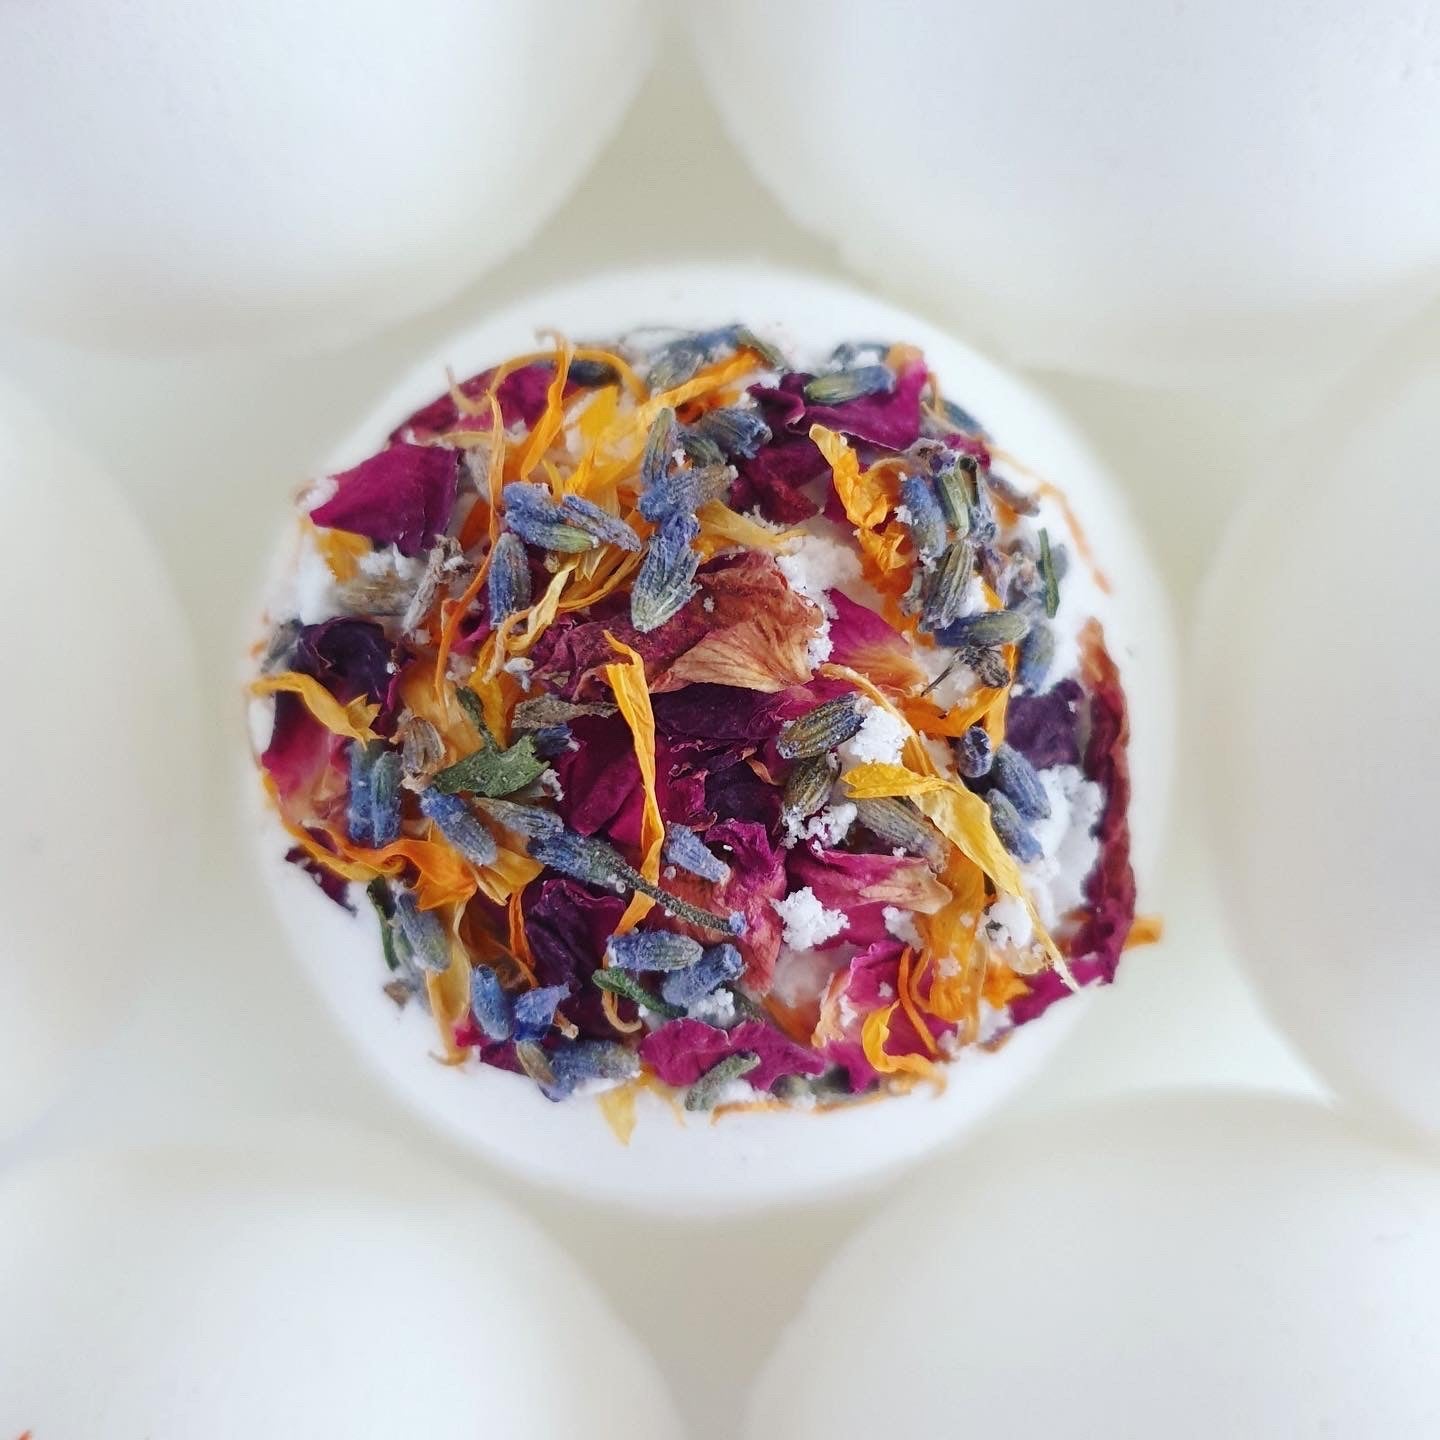 Floral Bath bomb made with colourful dried flower petals for a delightful relaxing bath.